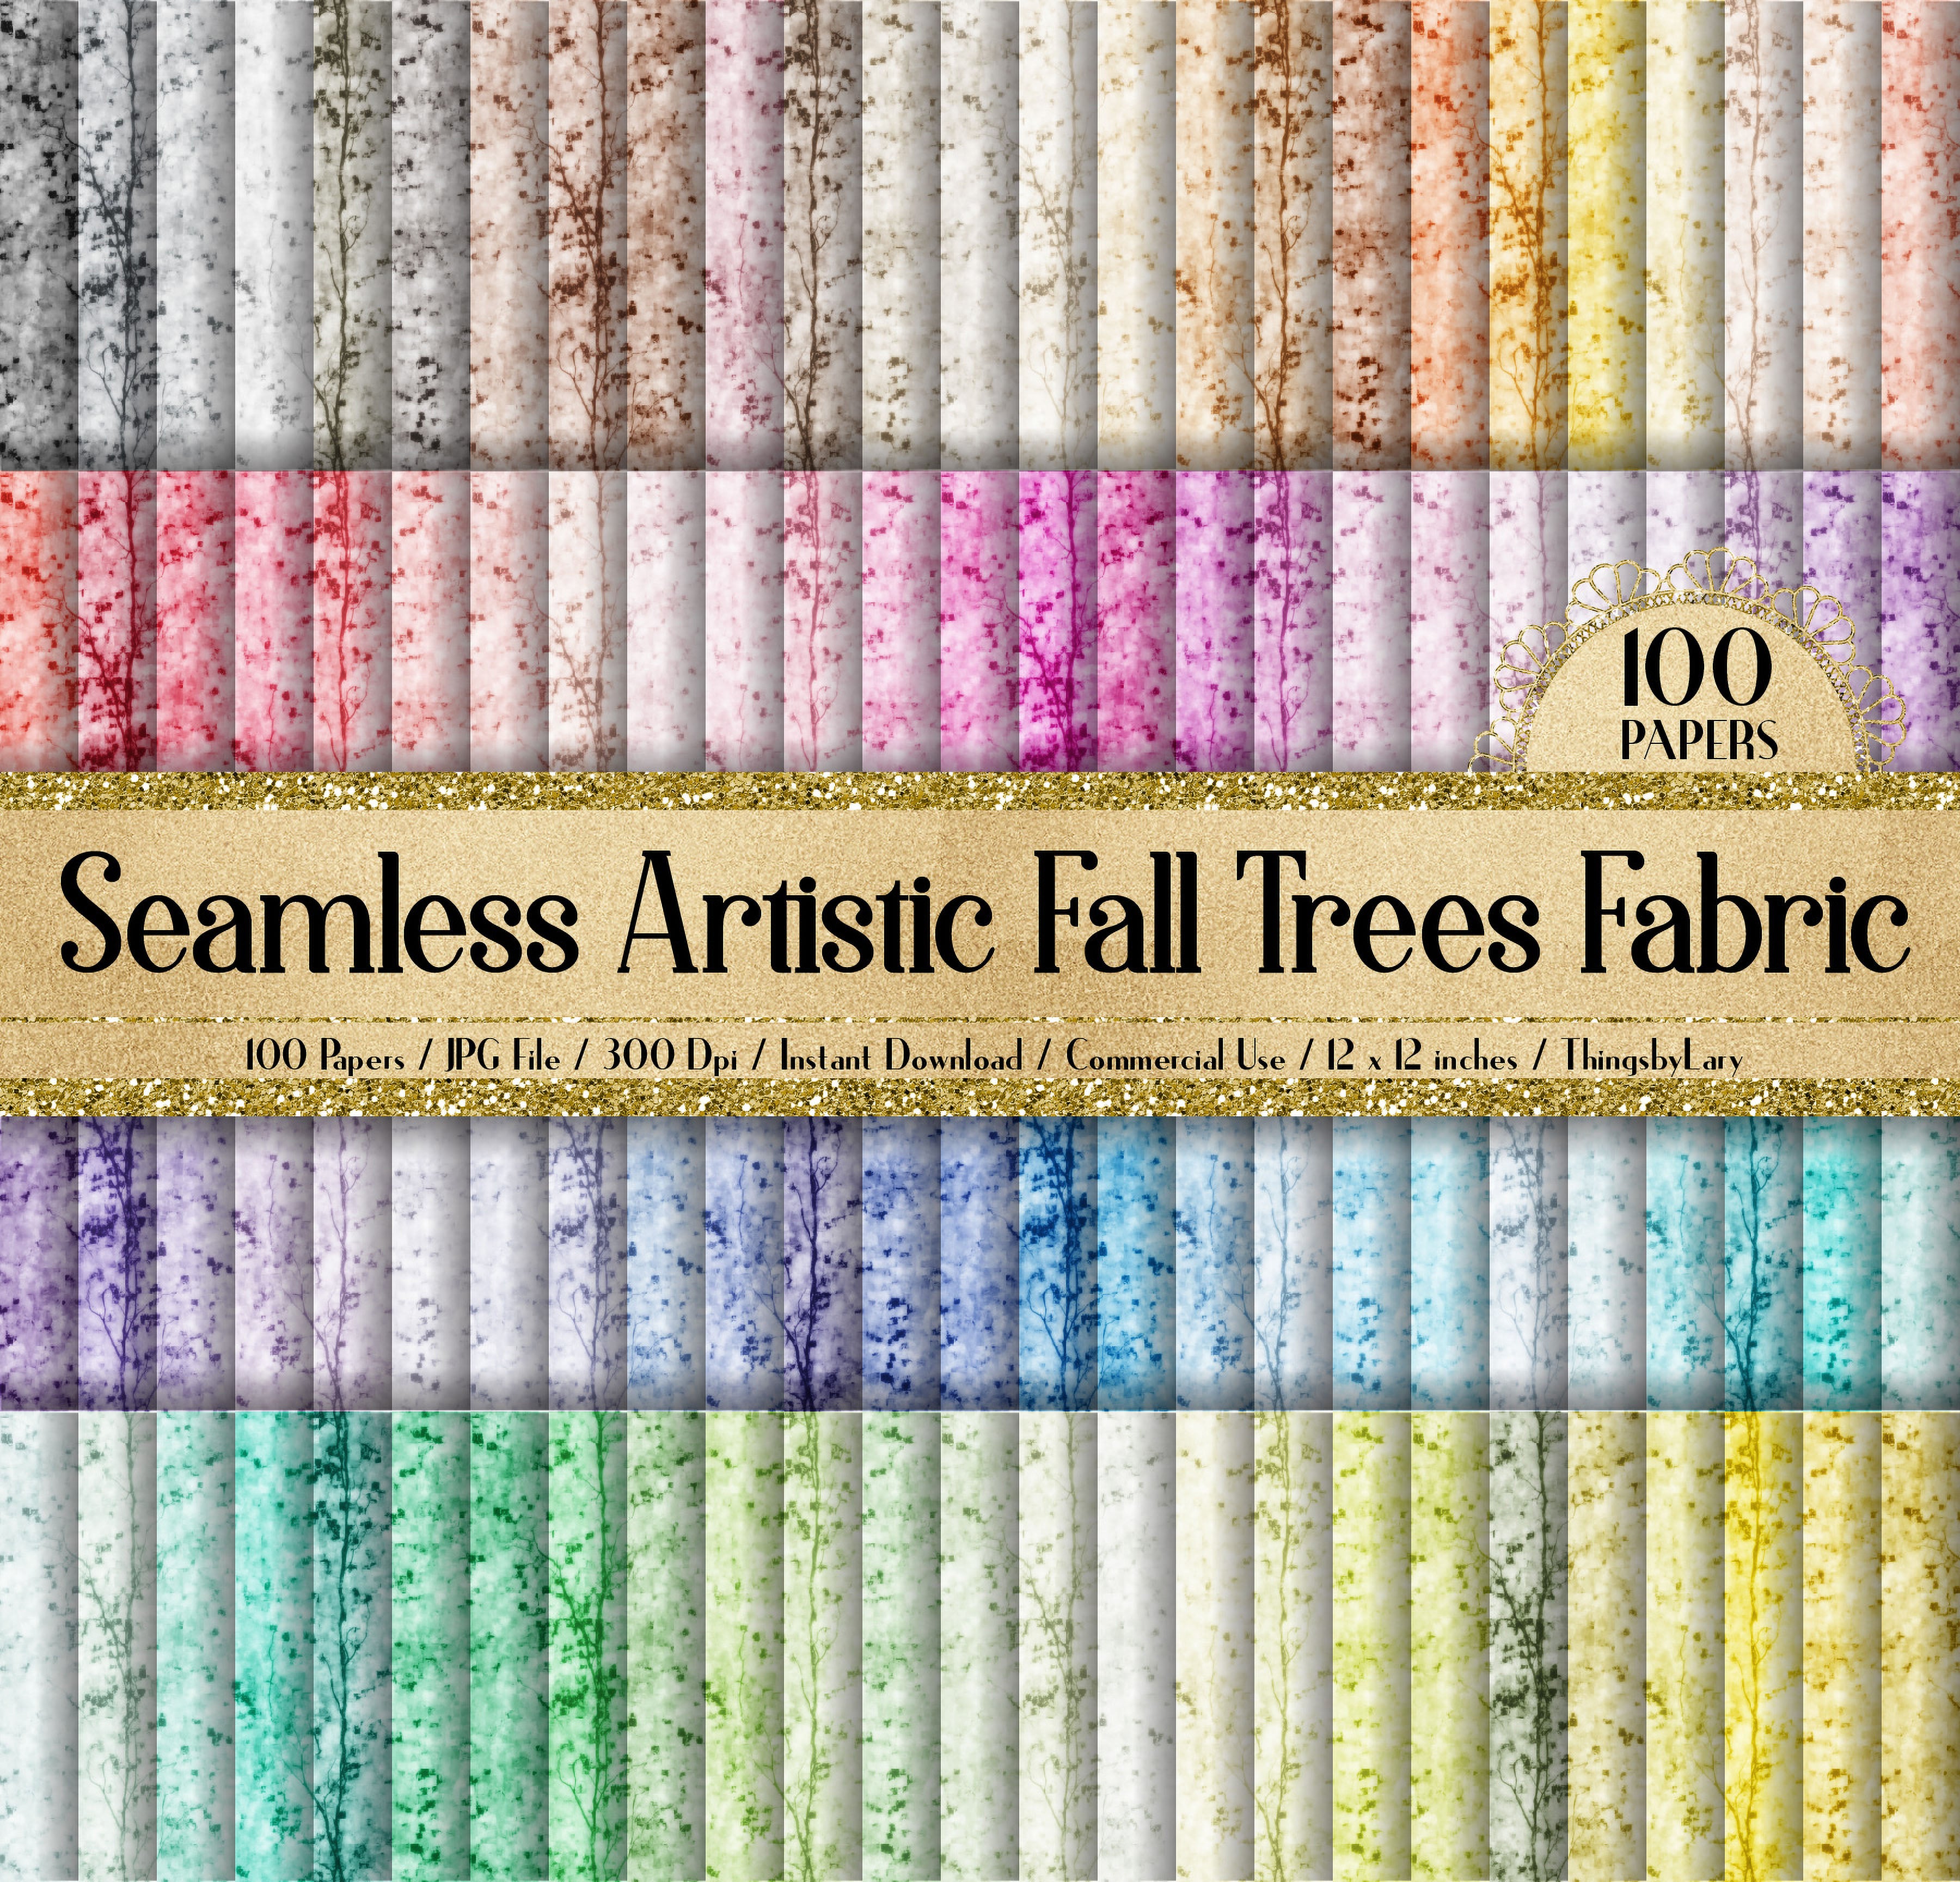 100 Seamless Artistic Fall Trees Fabric Digital Papers